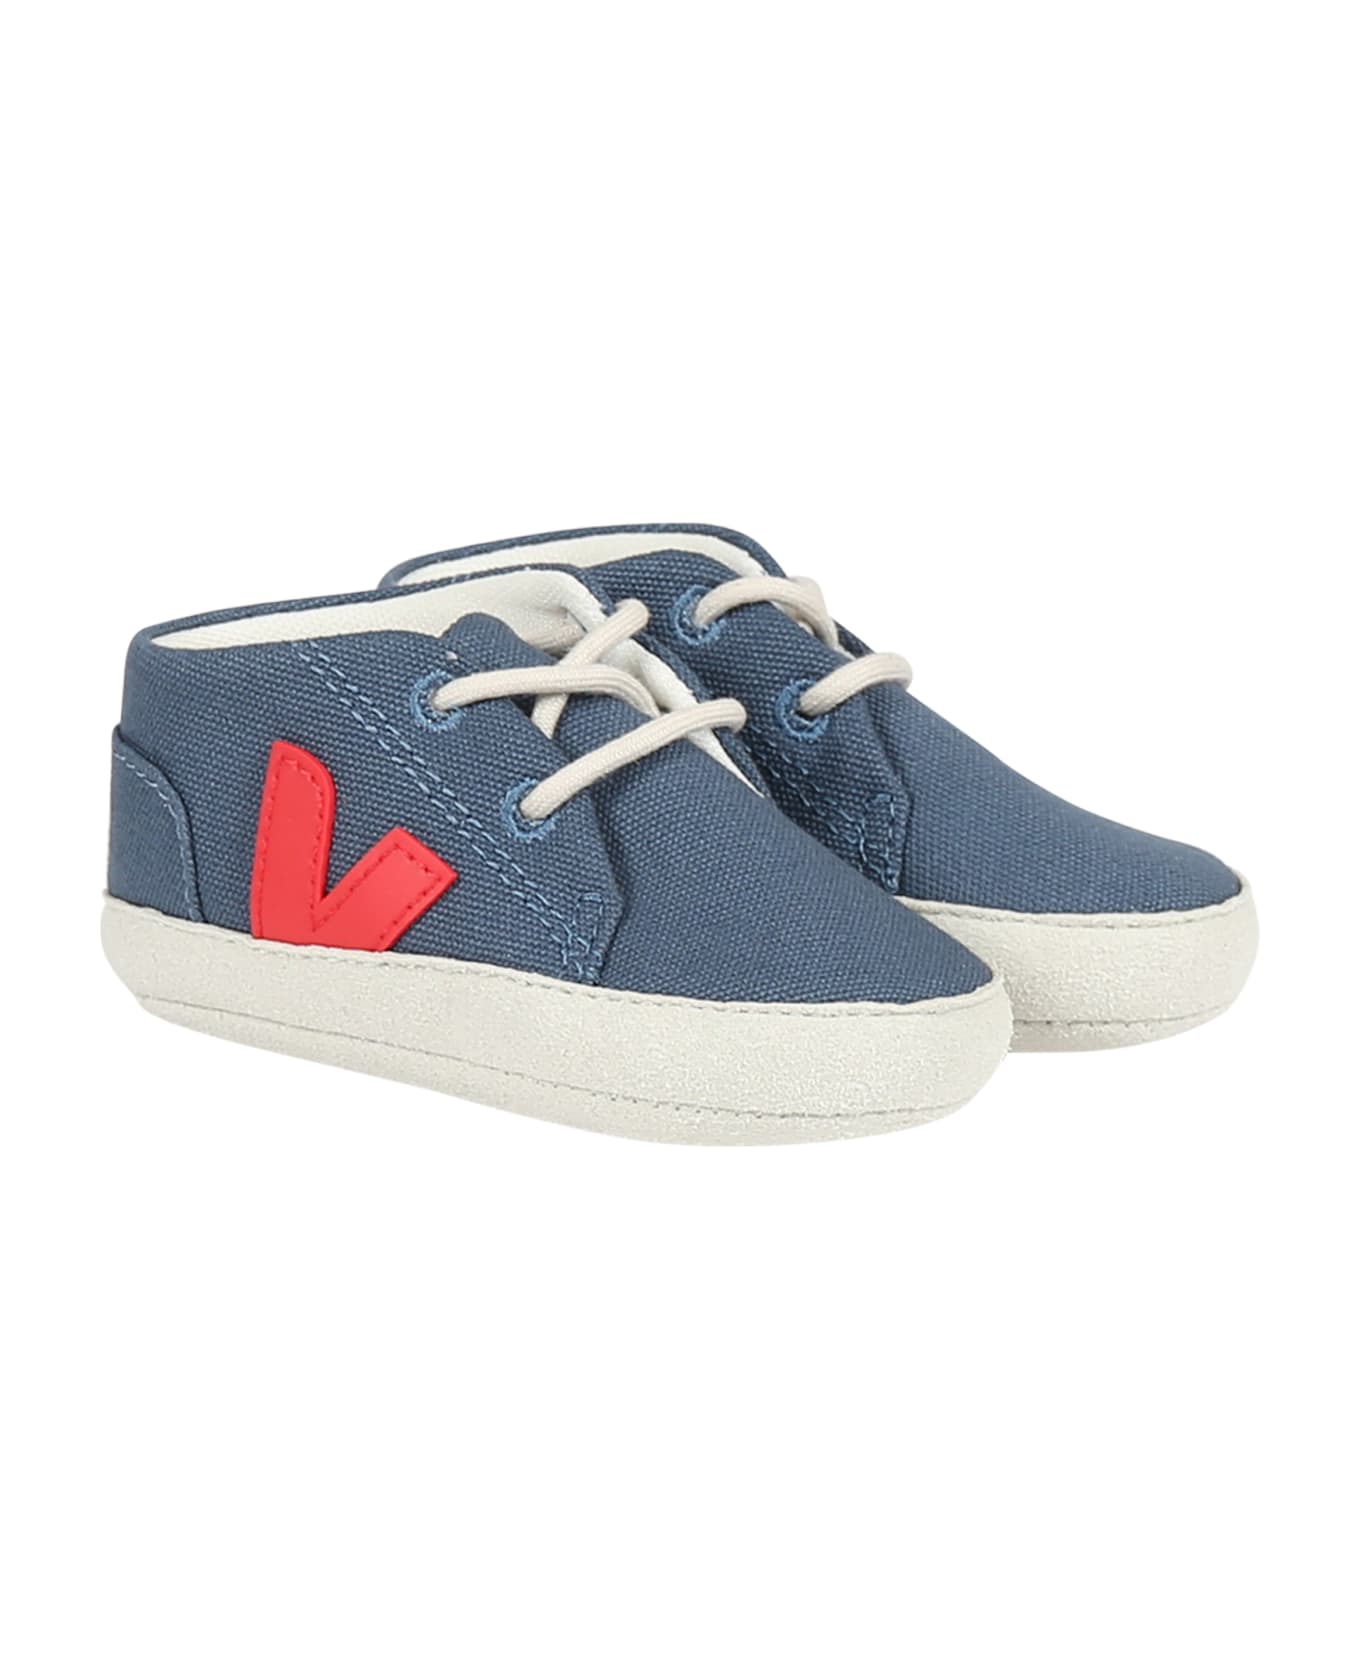 Veja Blue Sneakers For Baby Boy With Red Logo - Blue シューズ